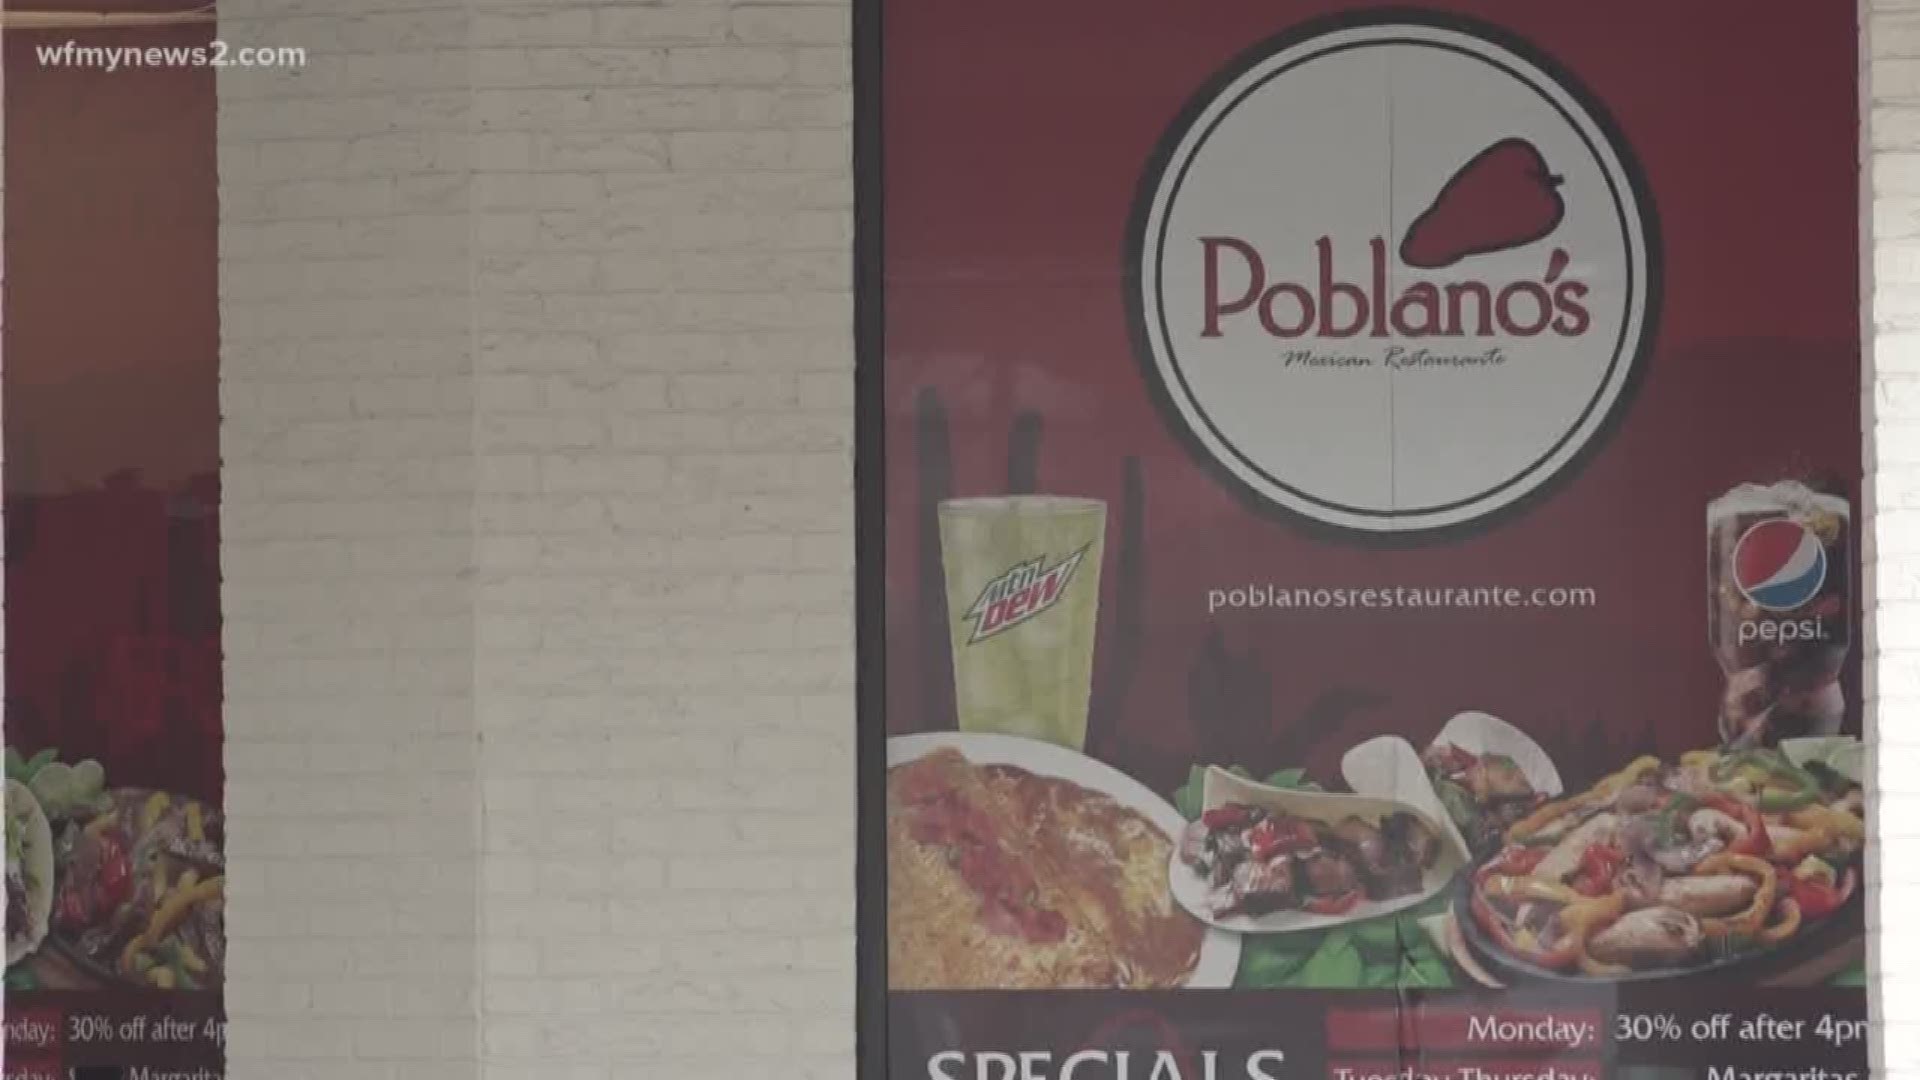 The owner of Poblano's in Greensboro says business is down about 70%. He says he had to cut 12 employees. Only four remain on the staff.